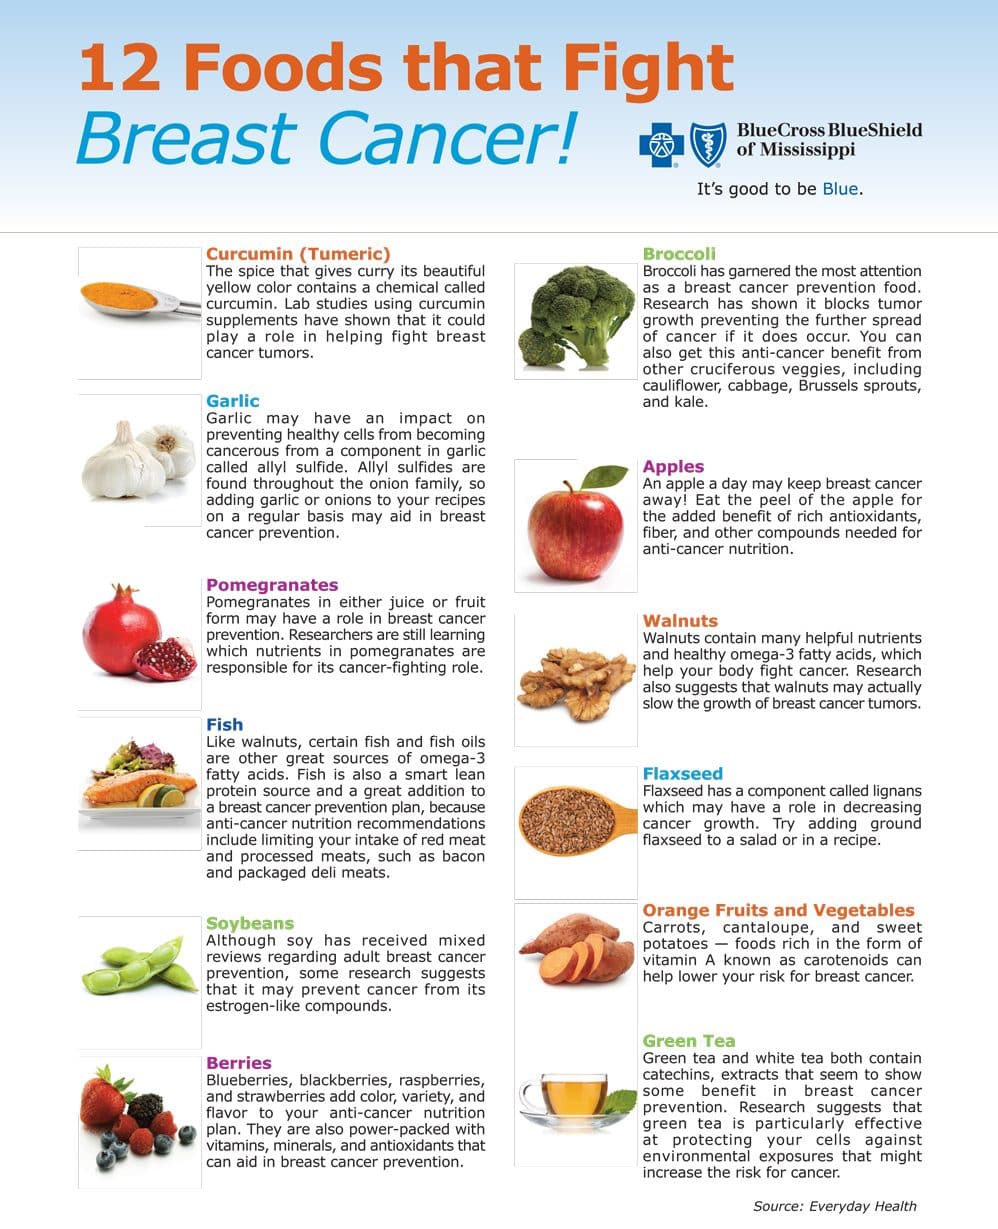 HEALTHY LIVING â Protect Yourself Against Breast Cancer